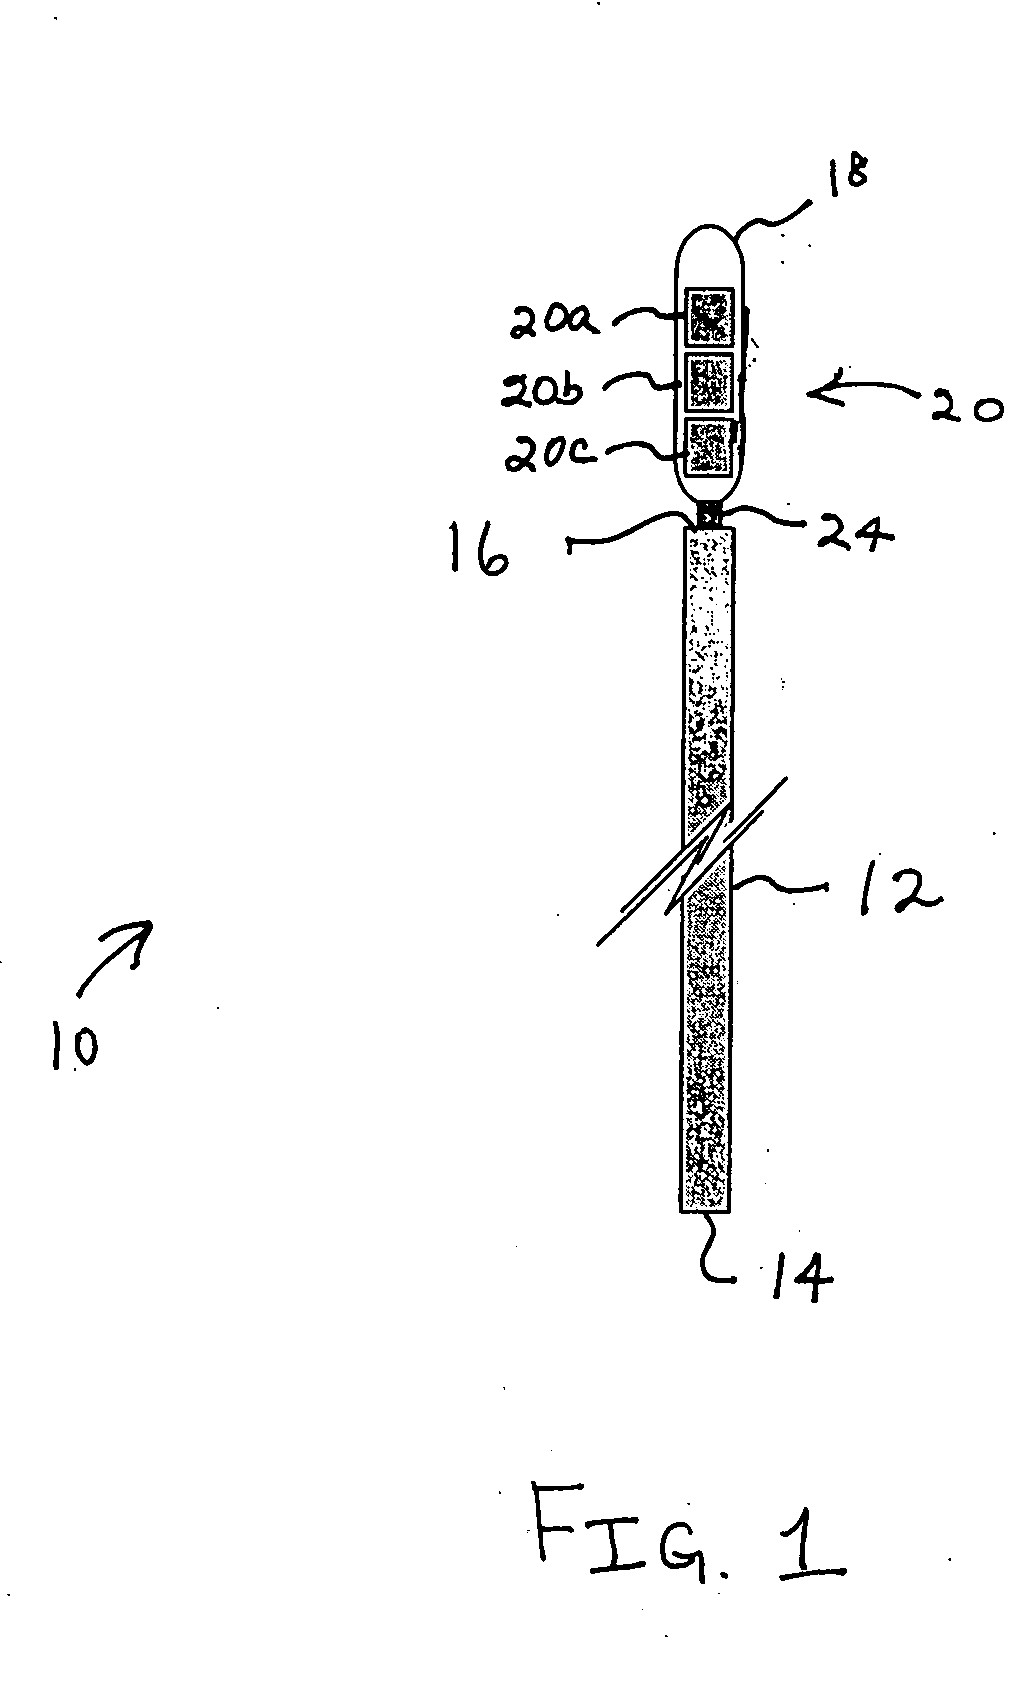 Method and apparatus for indicating an encountered obstacle during insertion of a medical device